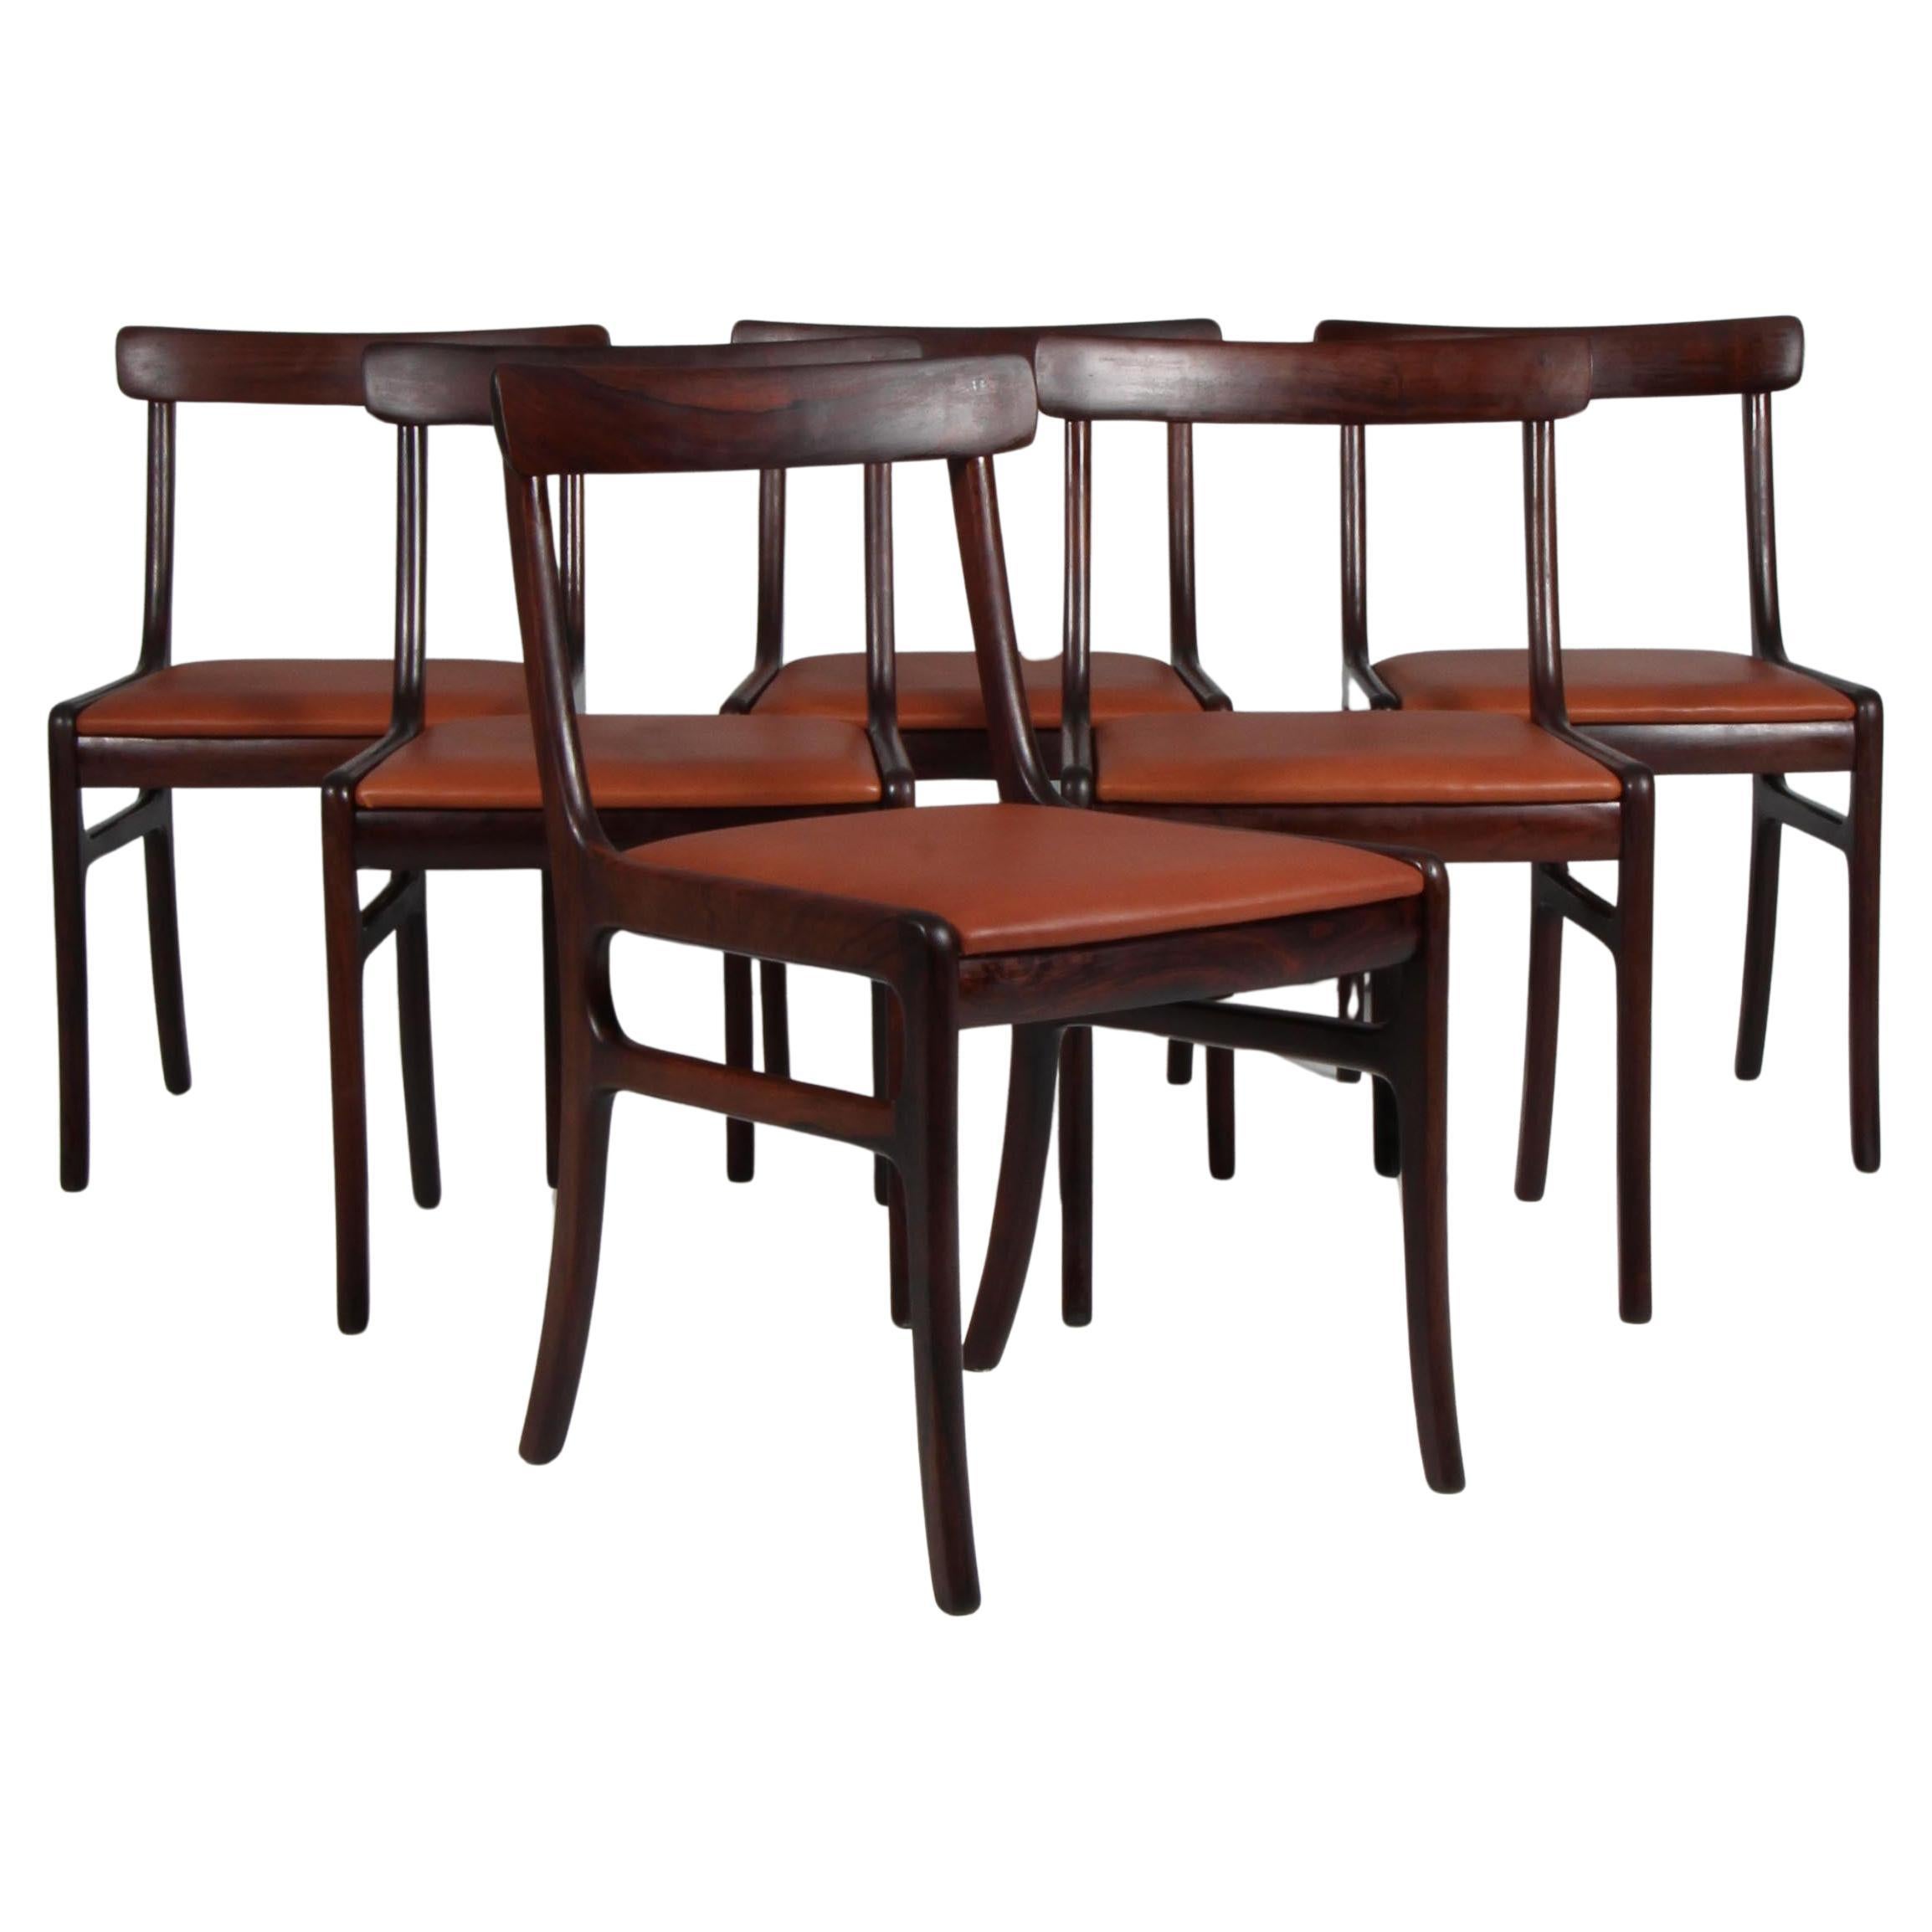 Poul Jeppesen Dining Room Chairs